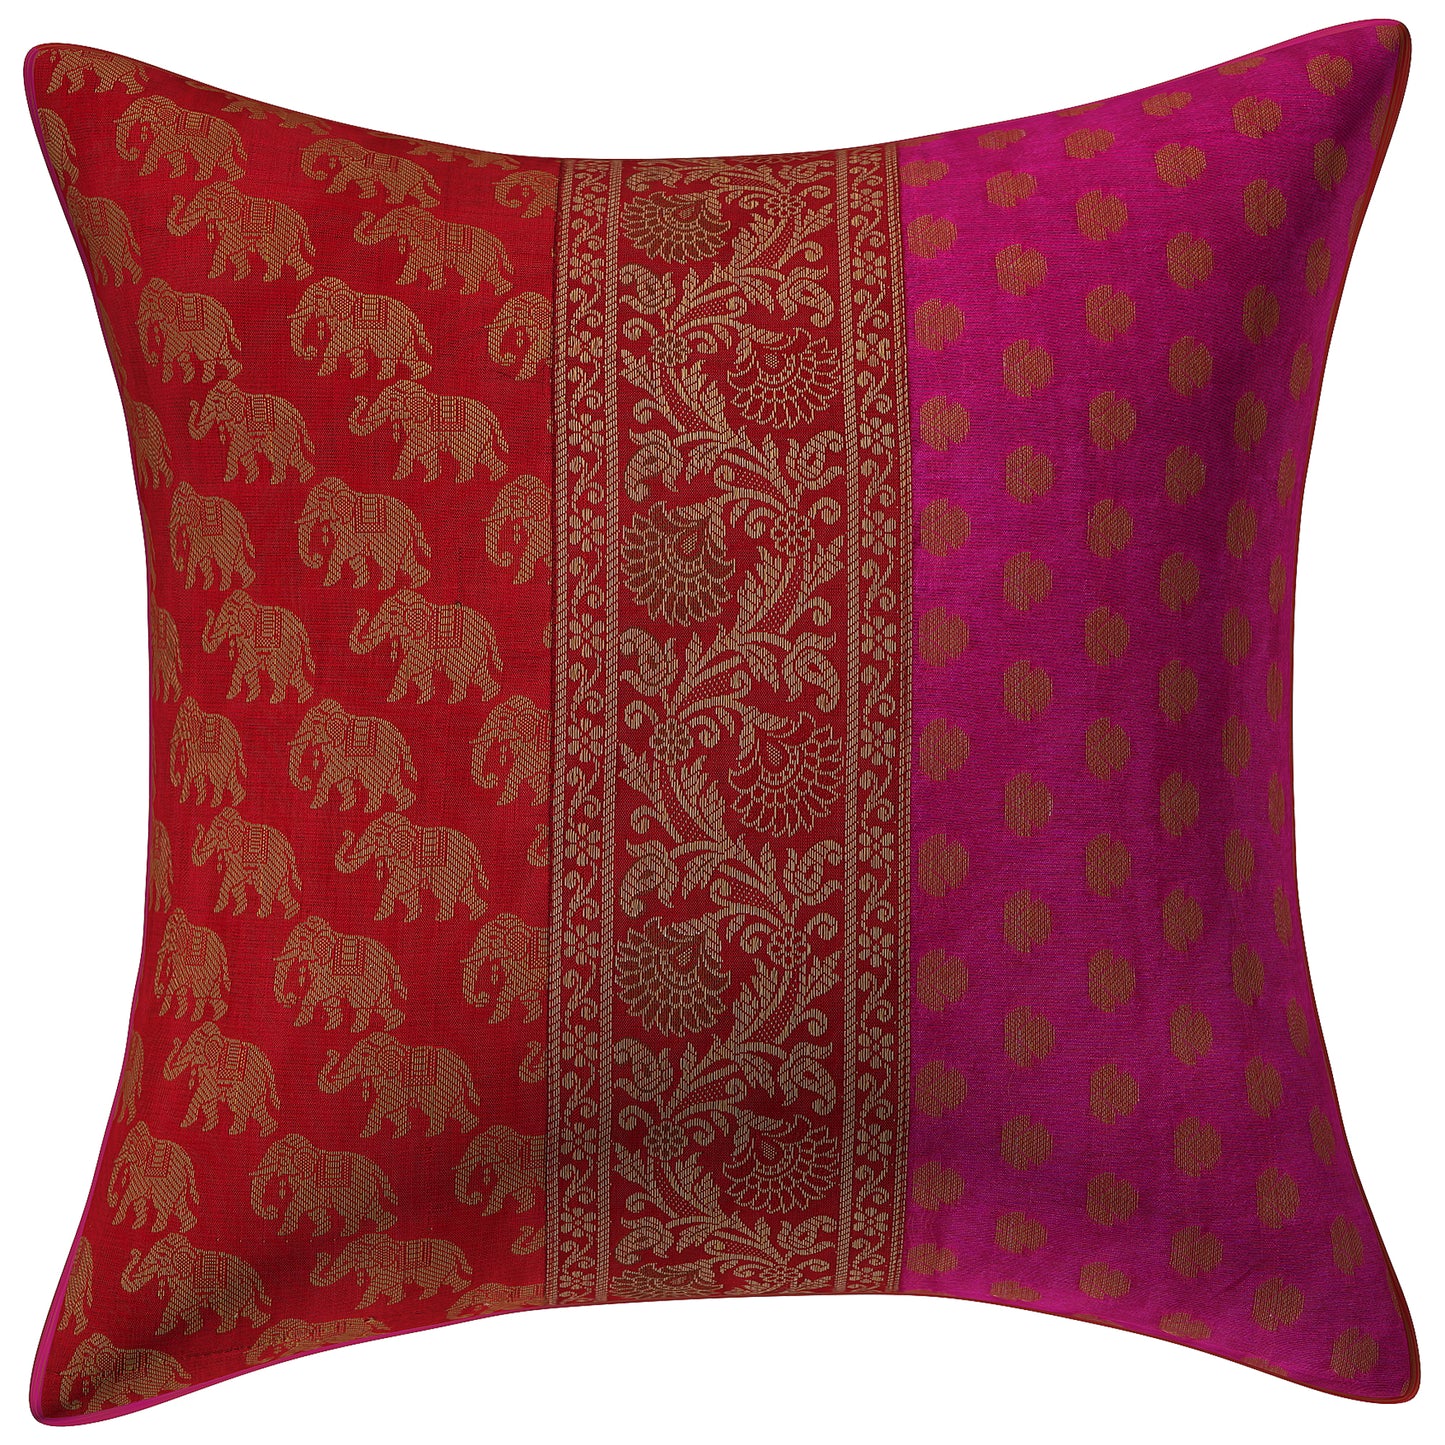 Indian Ethnic Brocade Silk Pink & Red Elephant cushion Cover Throw Pillow for Couch Sofa Home Décor Pillow Cover 16X16 In Set 2 Pc